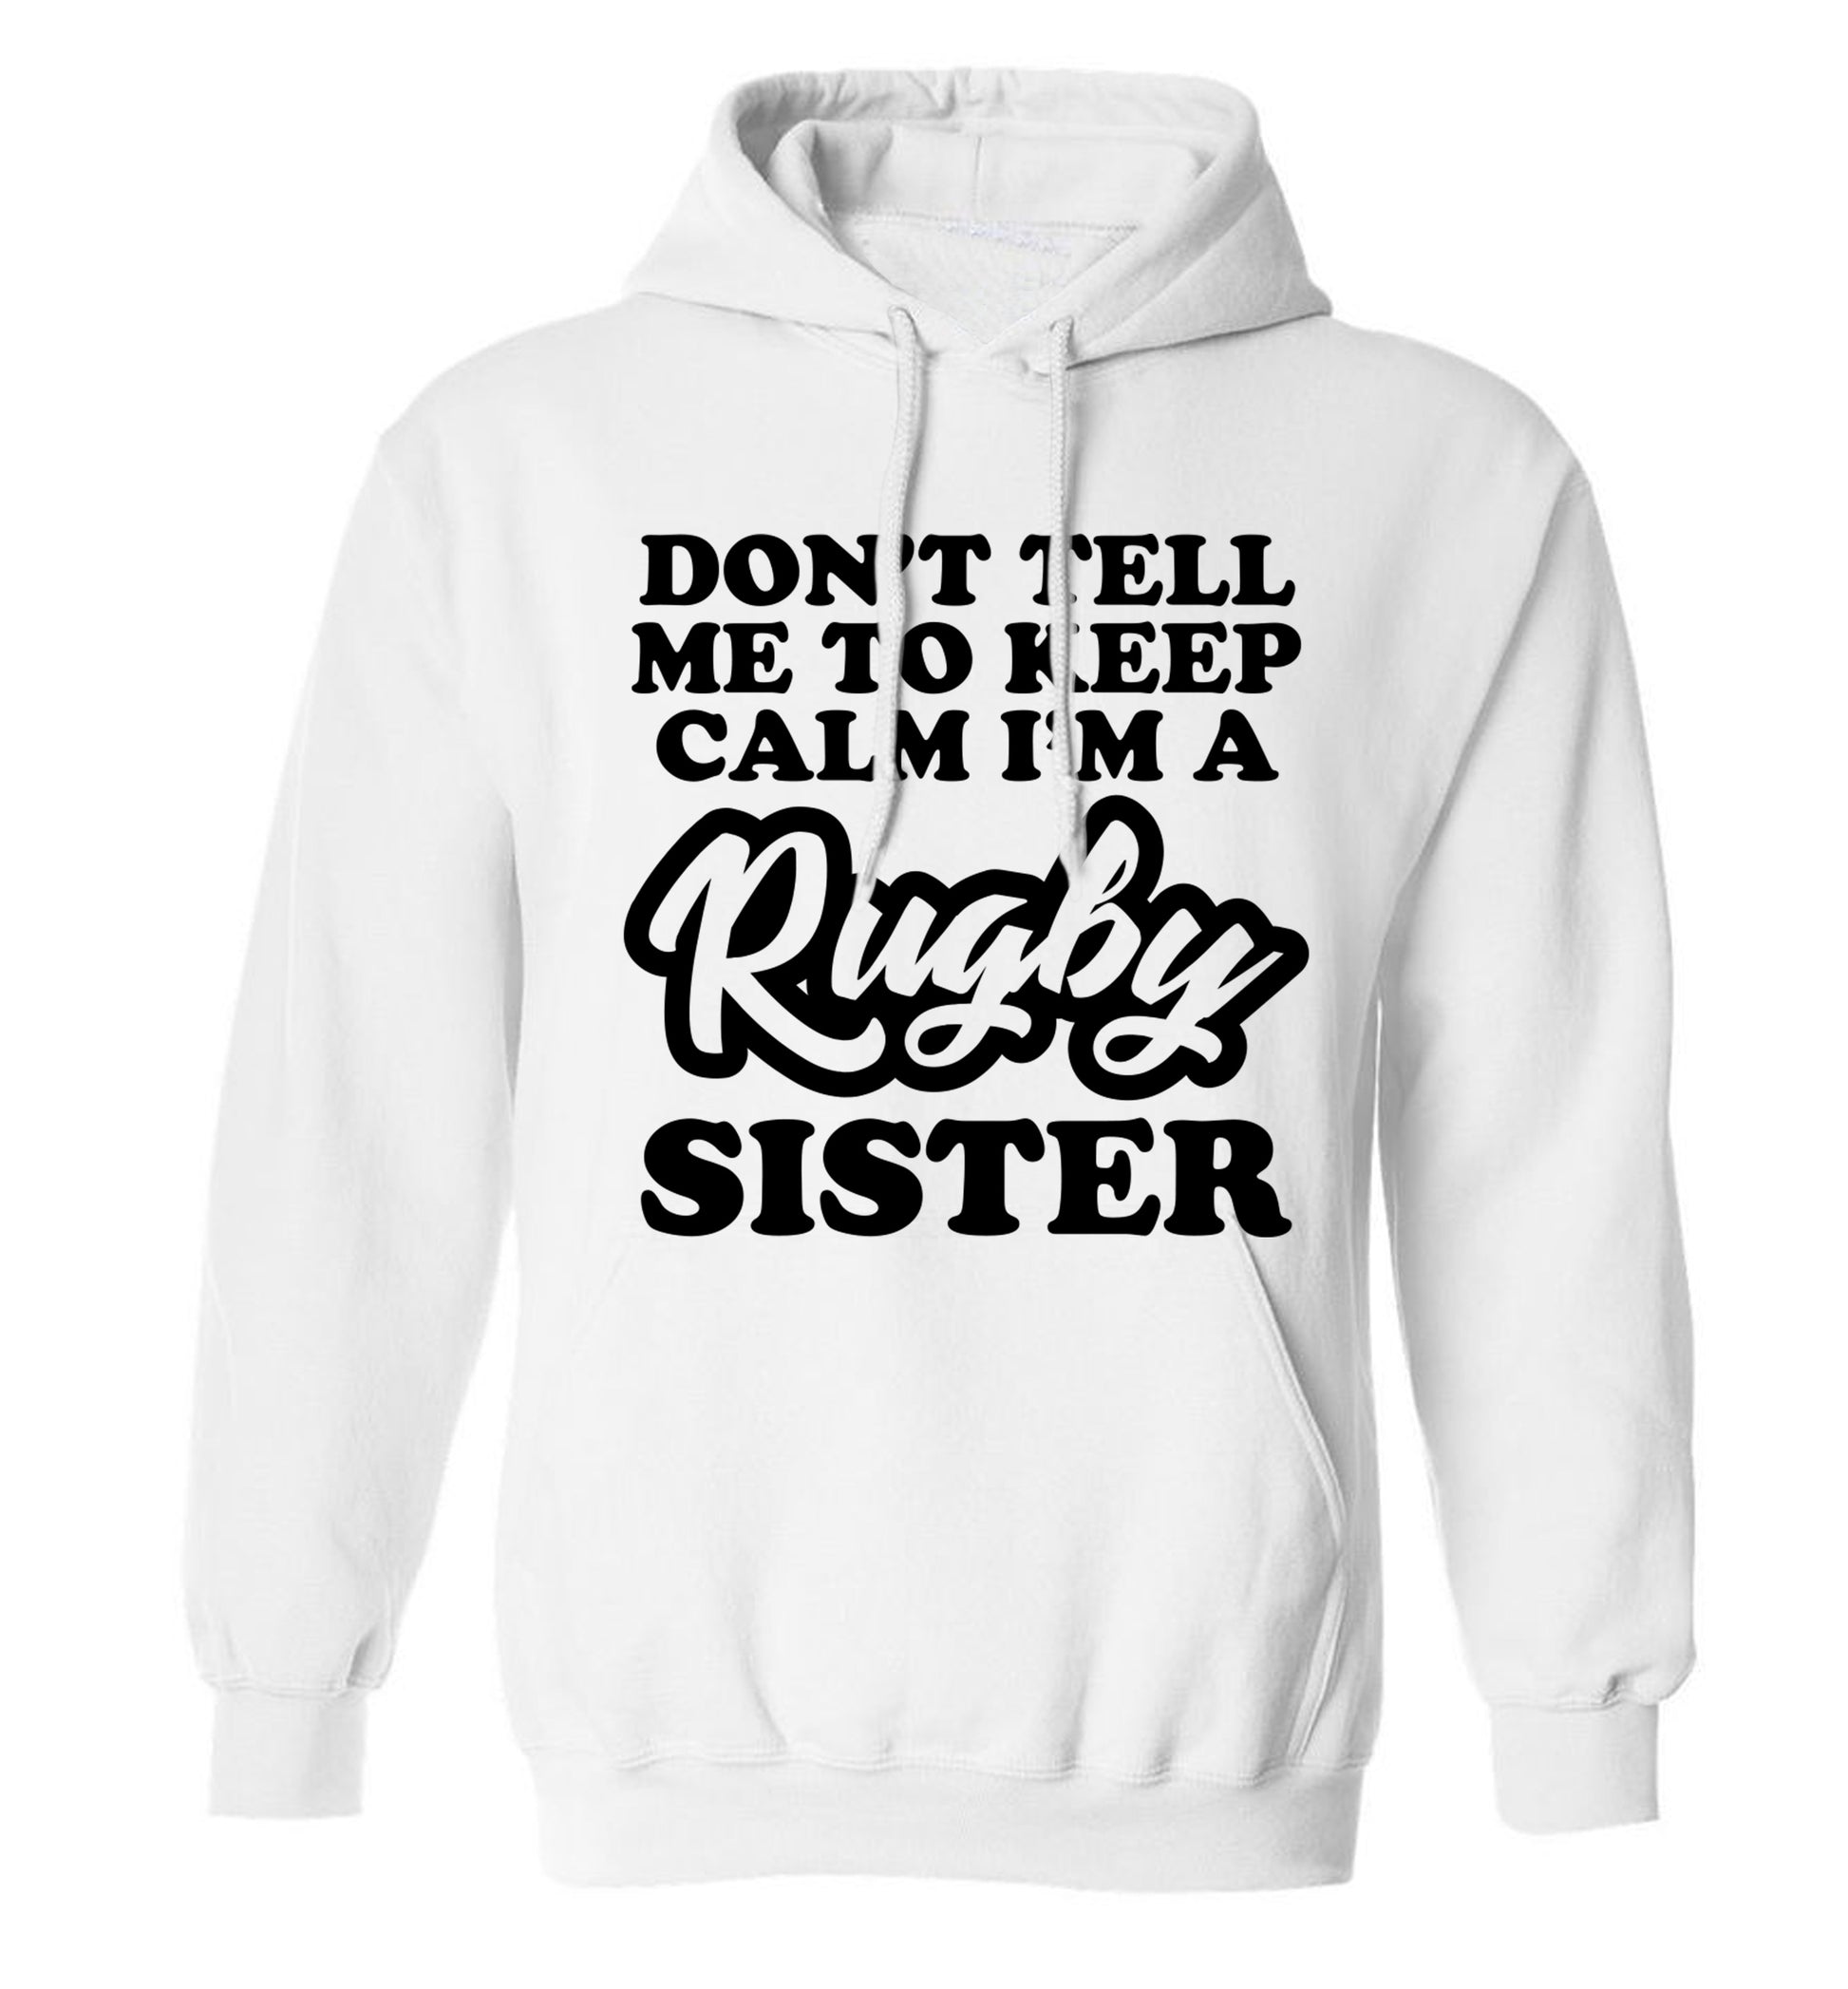 Don't tell me keep calm I'm a rugby sister adults unisex white hoodie 2XL